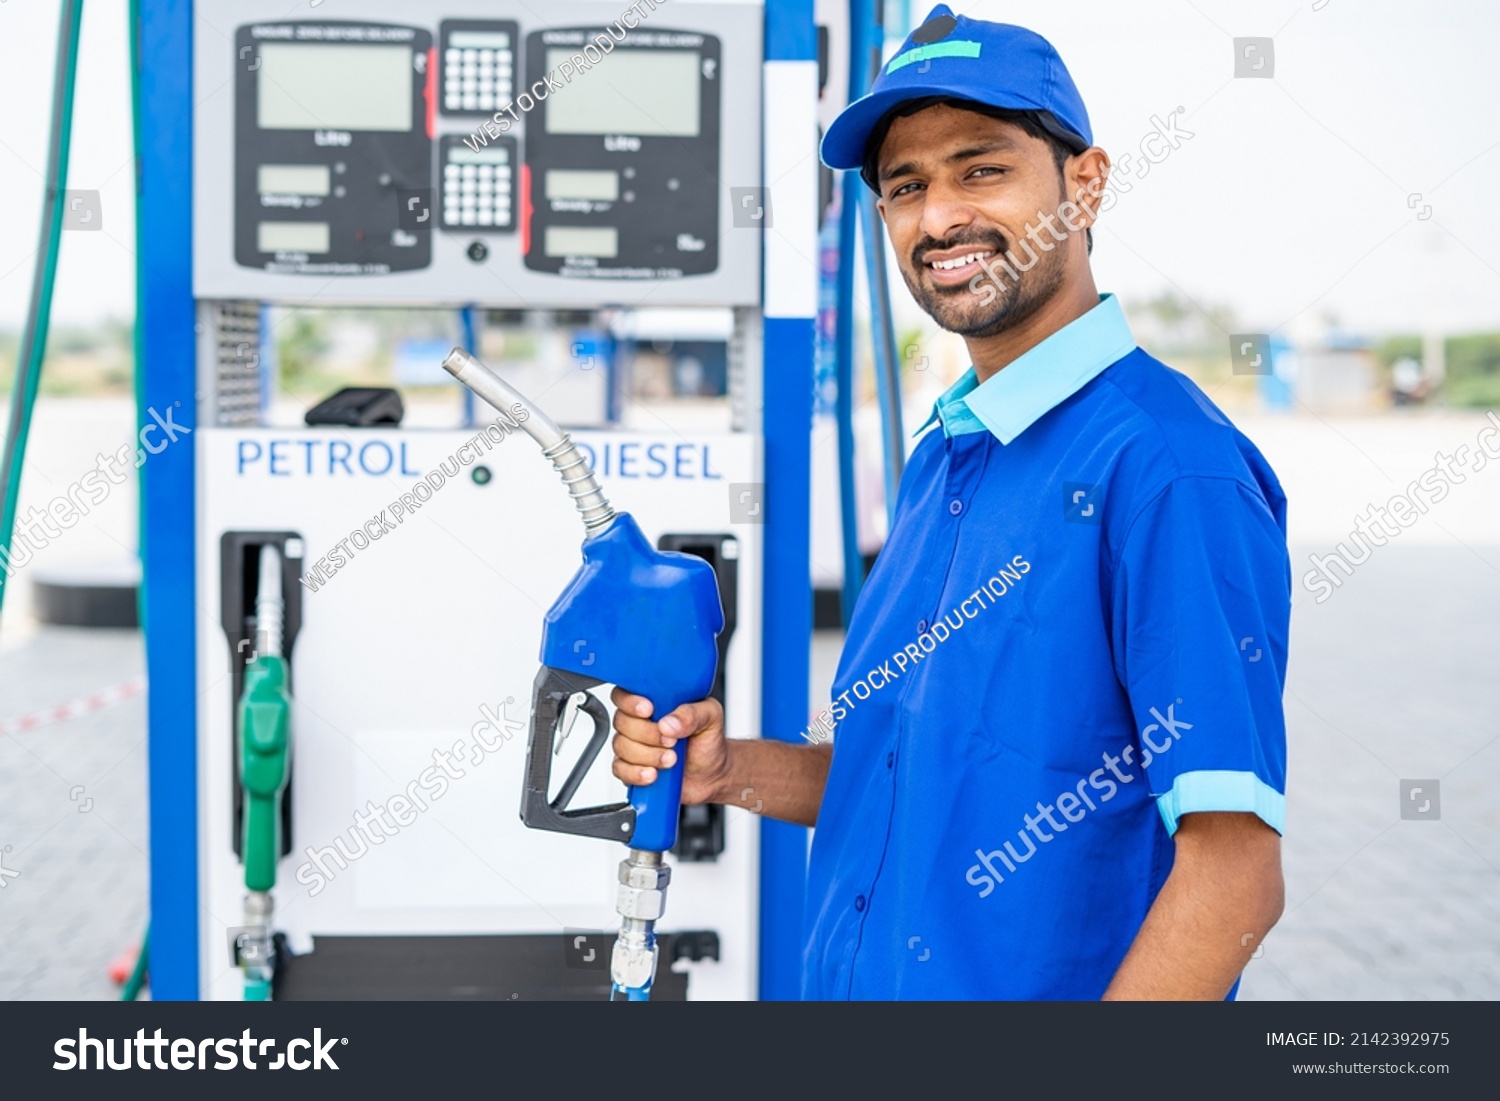 Happy petrol pump worker standing by holding fuel nozzle while looking camera at gas filling station - concept of happiness, job and petroleum service. #2142392975